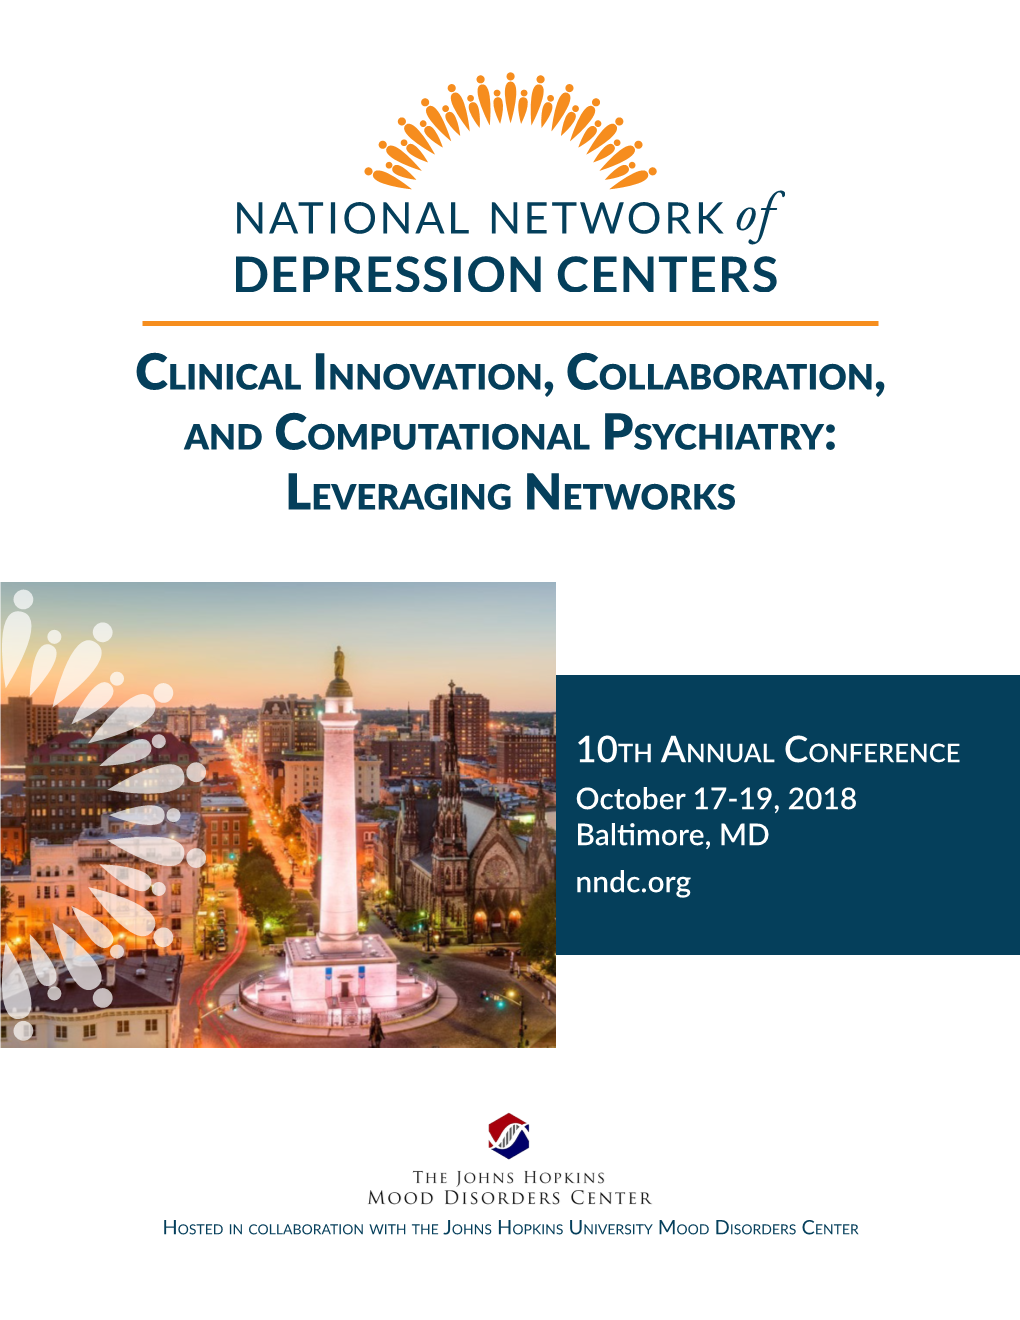 Clinical Innovation, Collaboration, and Computational Psychiatry: Leveraging Networks